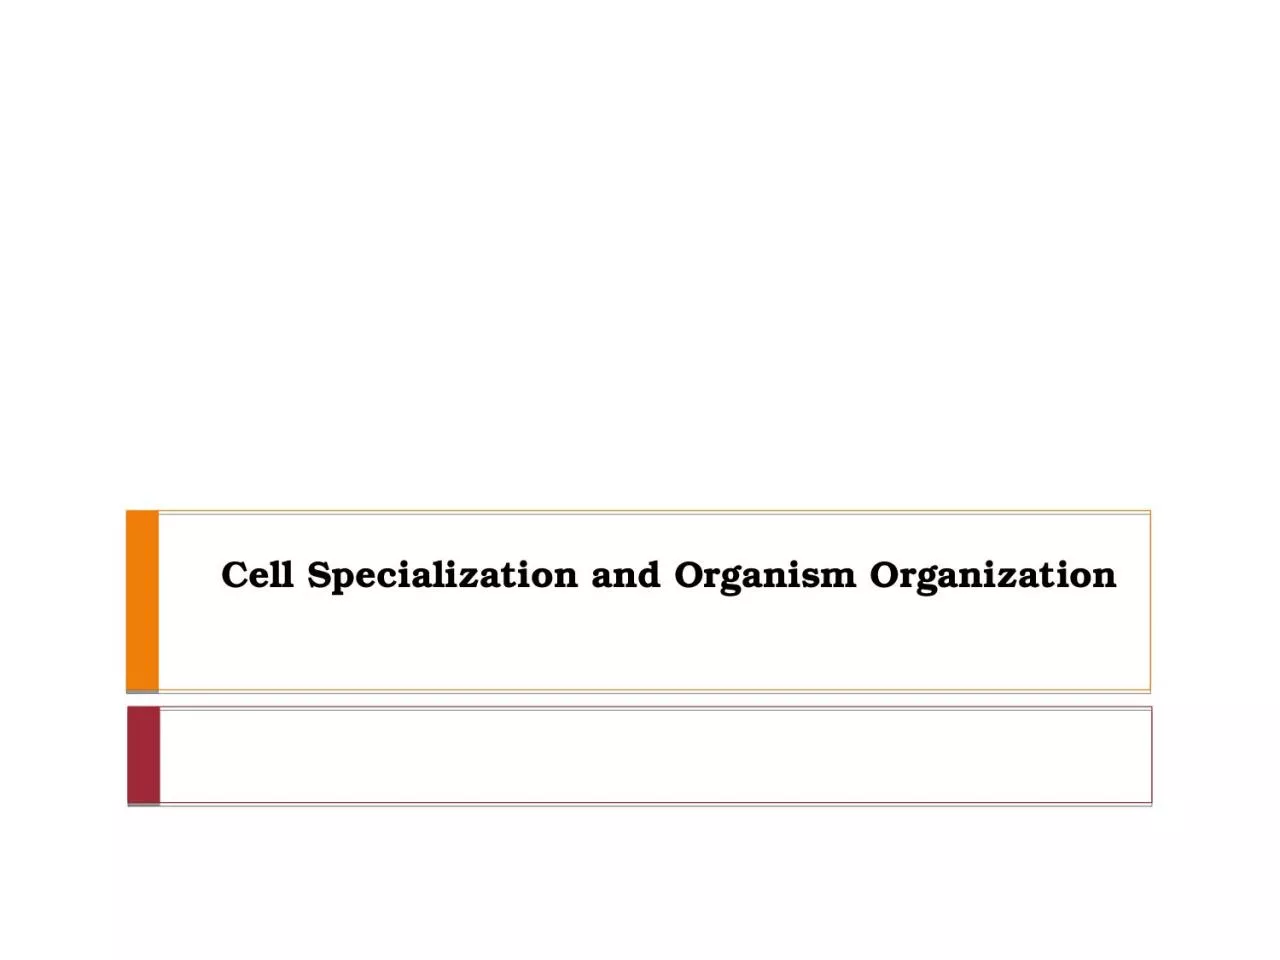 Cell Specialization and Organism Organization